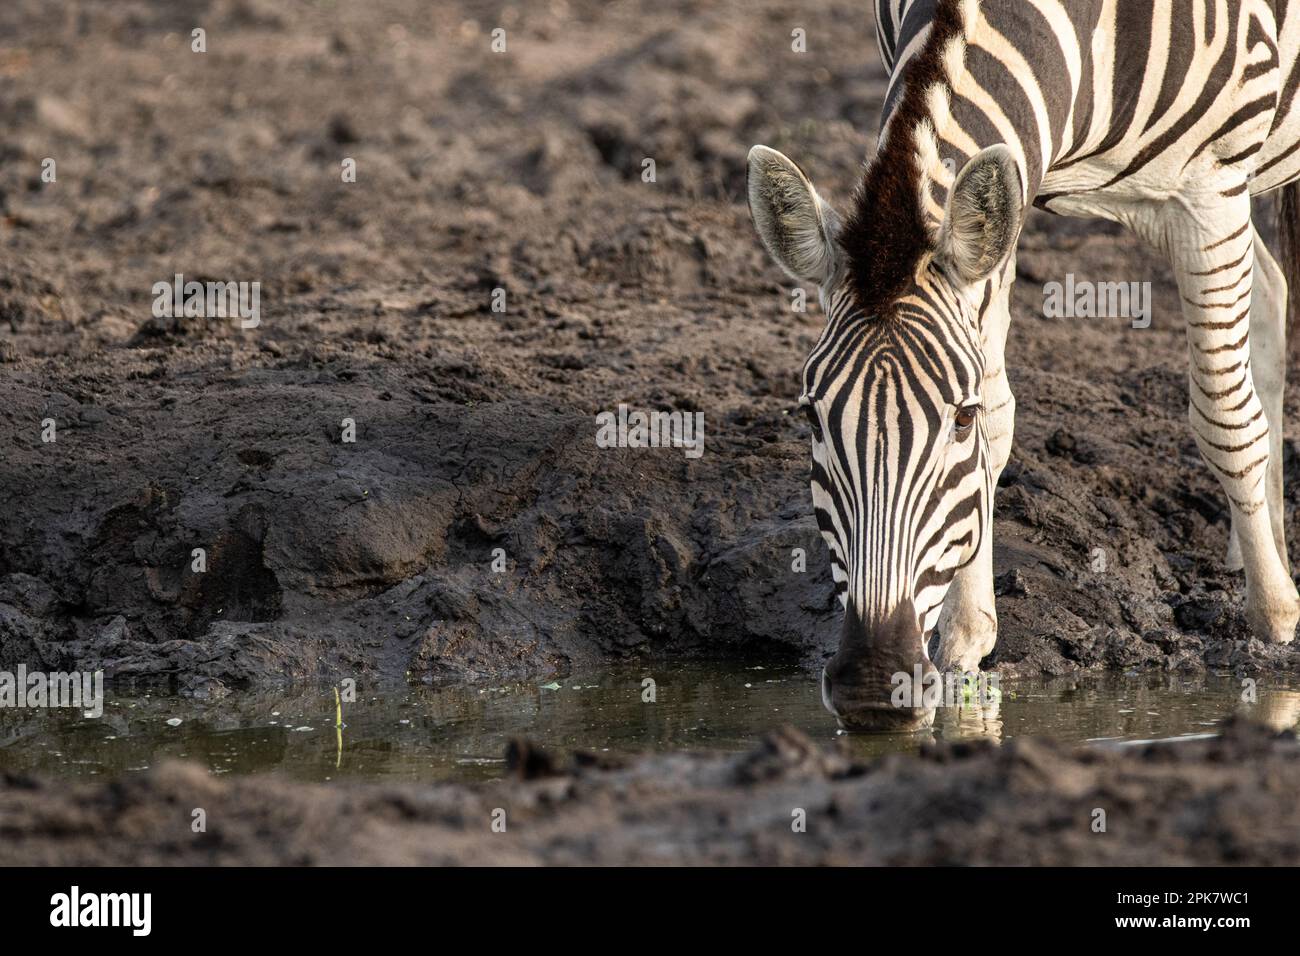 A zebra, Equus quagga, drinking water from a dam. Stock Photo